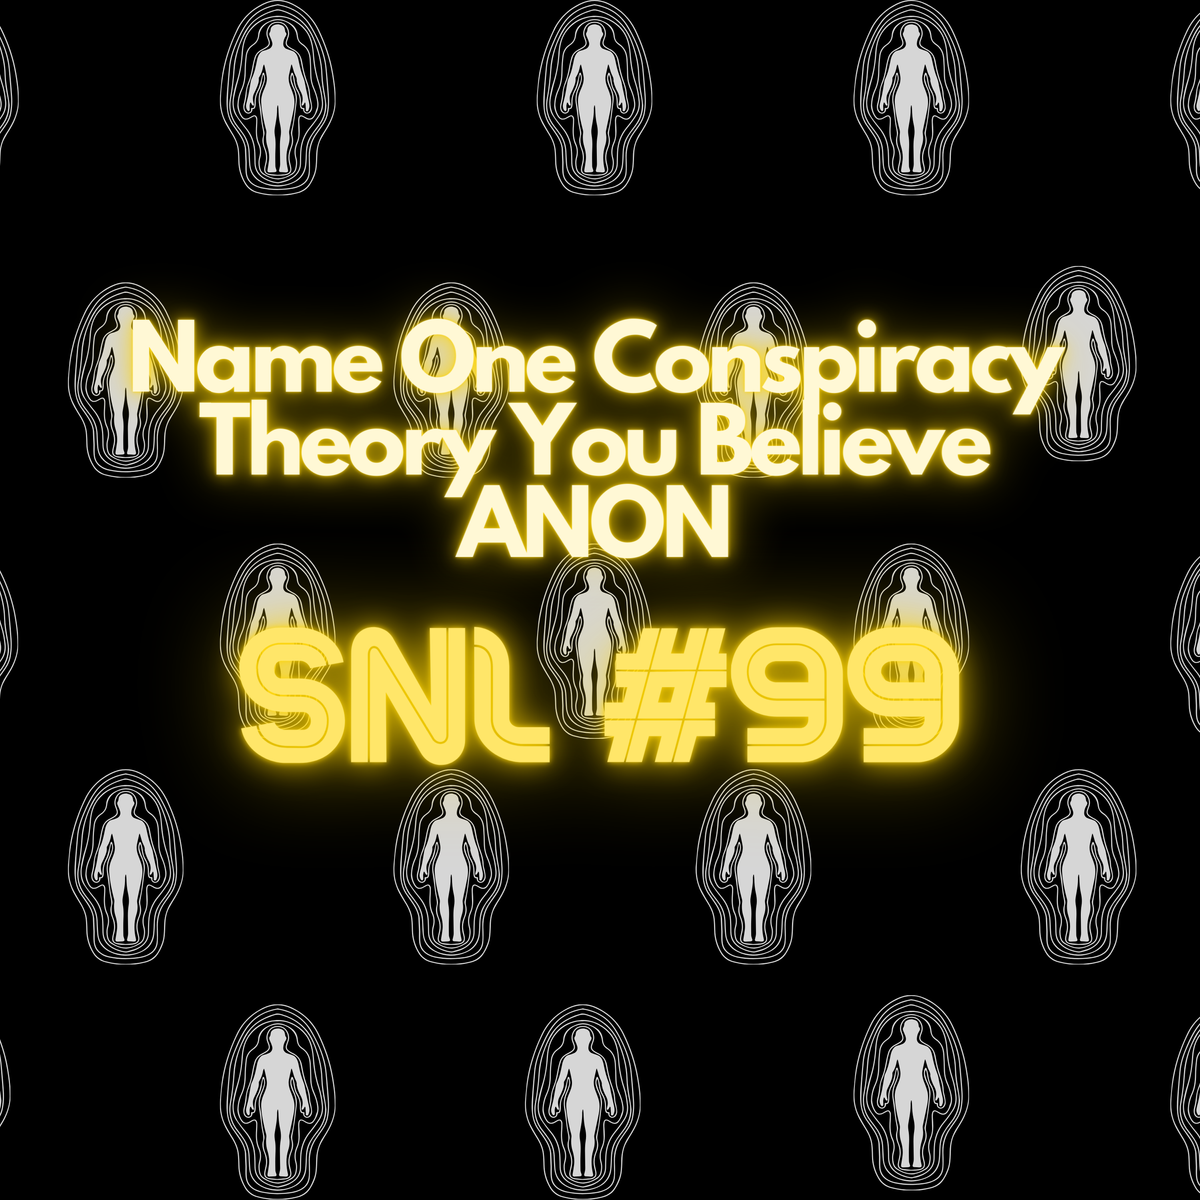 Name One Conspiracy Theory You Believe ANON - Stacker News Saturday Newsletter